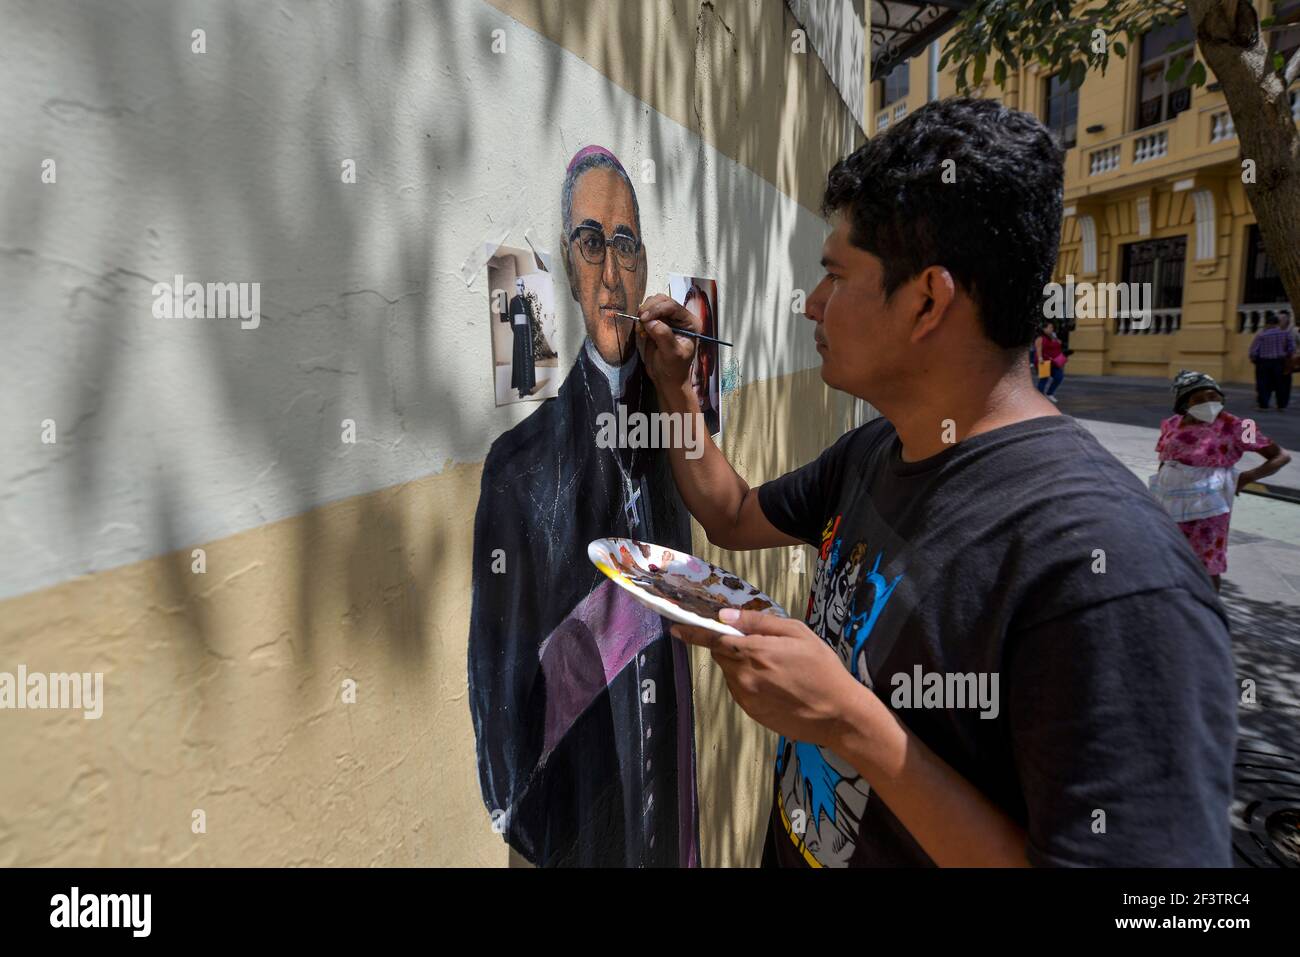 San Salvador, El Salvador. 17th Mar, 2021. CRISTIAN L'PEZ restores a mural of Saint Oscar Arnulfo Romero outside of the San Salvador cathedral a week before the 41st martyrdom anniversary of the archbishop that was murdered on March 24th, 1980, while celebrating mass.El Salvador reports 62,531 COVID-19 confirmed cases and 1962 deaths. Credit: Camilo Freedman/ZUMA Wire/Alamy Live News Stock Photo